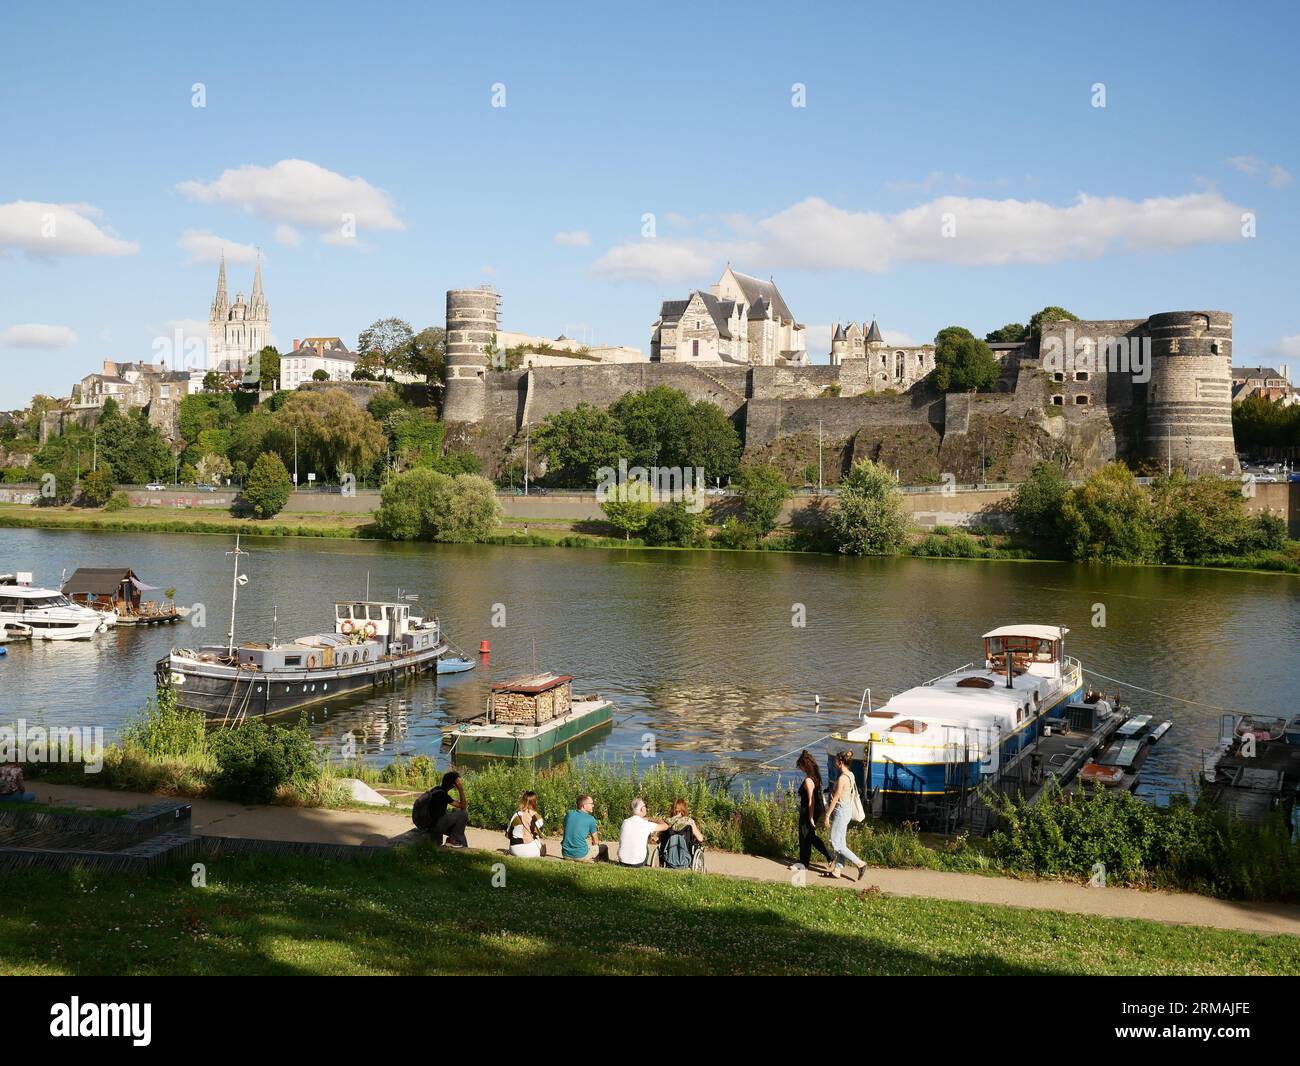 View over River Maine to Château d'Angers and Cathédrale Saint-Maurice d'Angers. Angers, France. Stock Photo